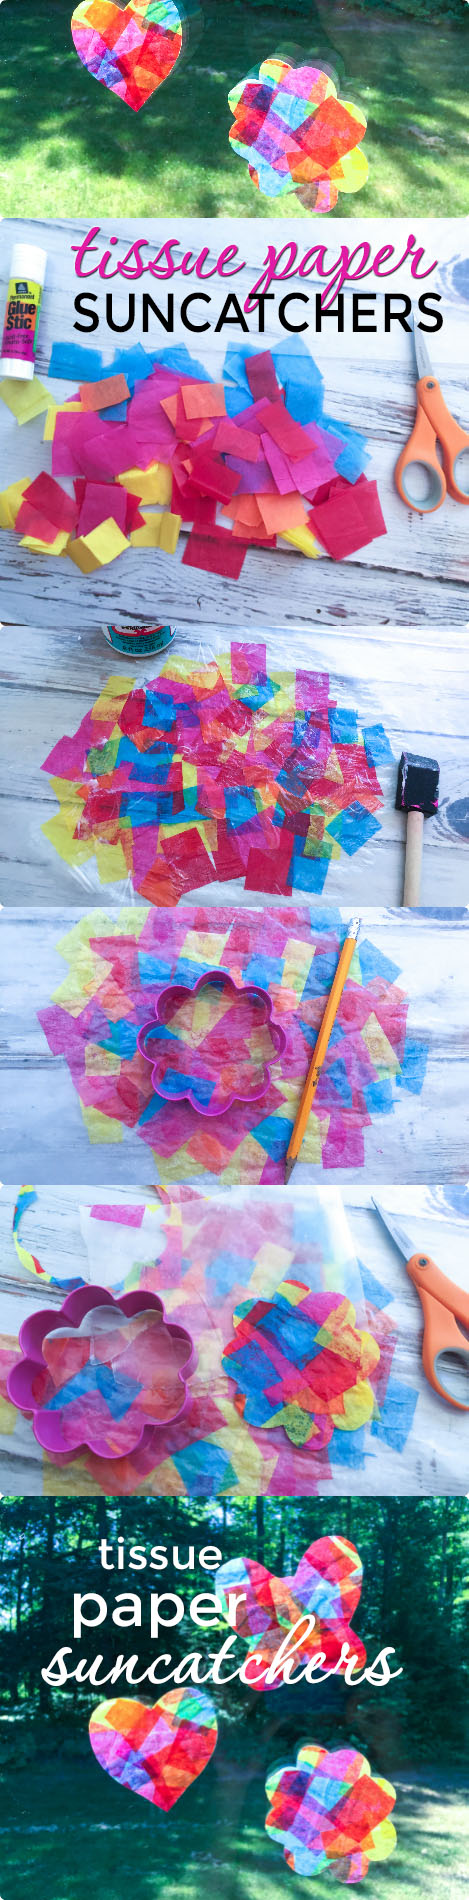 These tissue paper suncatchers are so fun to make and they keep the little ones entertained for hours! Put ribbon on the ends and fly them around the house like a kite!